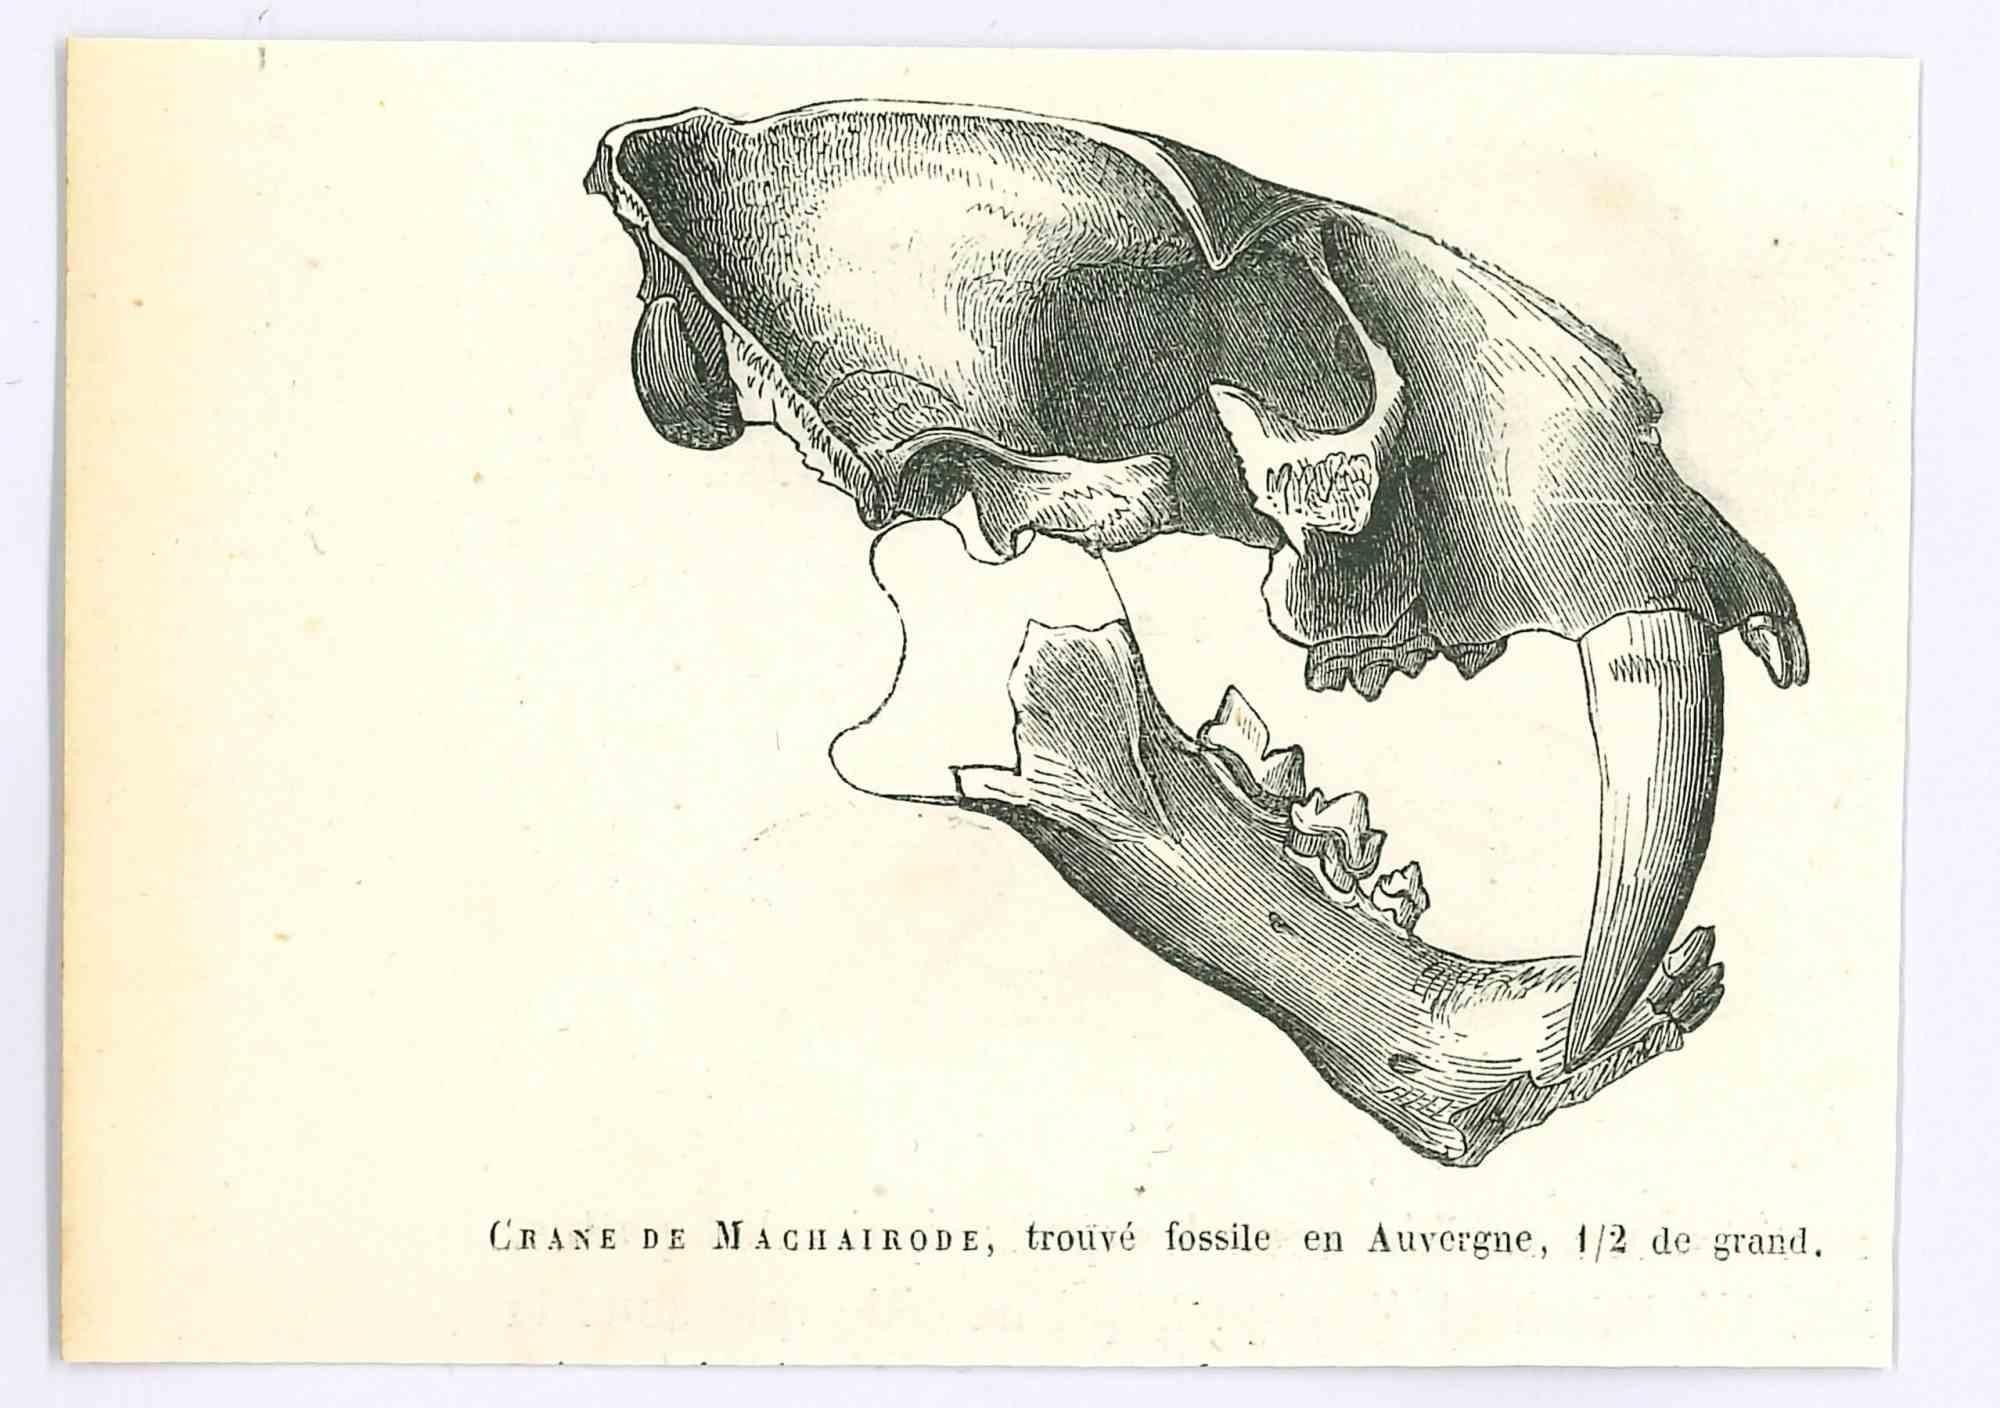 The Skull - Original Lithograph by Paul Gervais - 1854